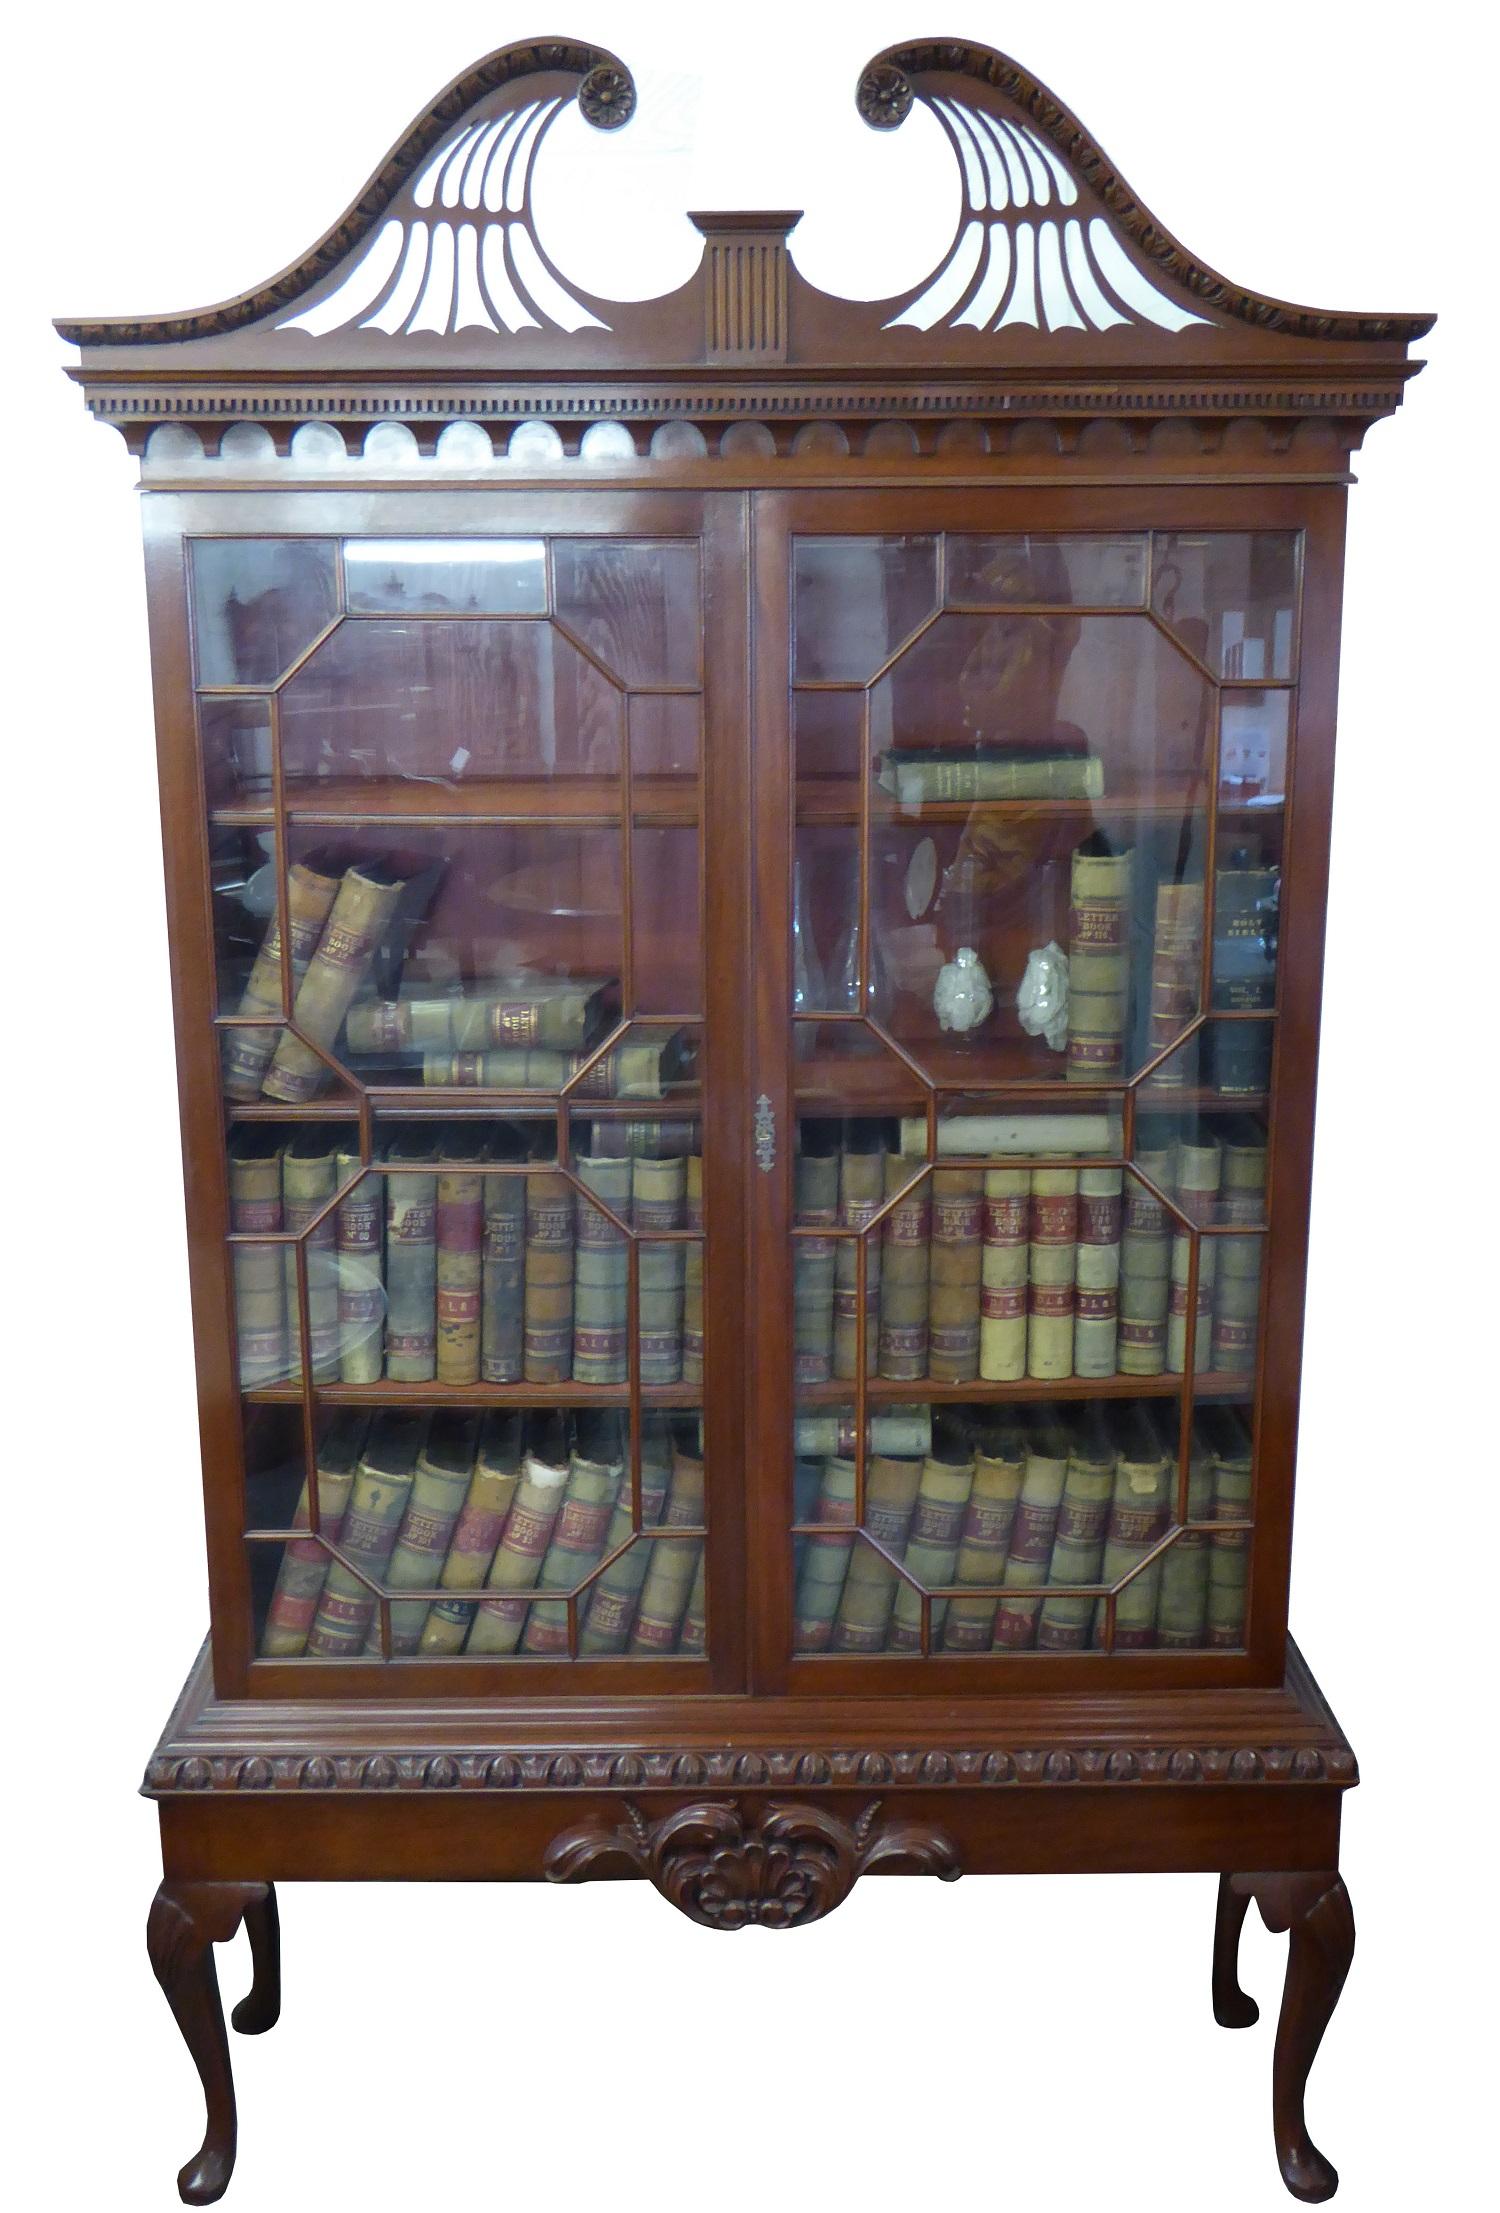 For sale is a fine quality matching pair of Chippendale Revival bookcase. Each bookcase has an ornate swan neck pediment with egg and dart molding above dentil molding, with two astregal glazed doors enclosing adjustable shelves. The bookcases both